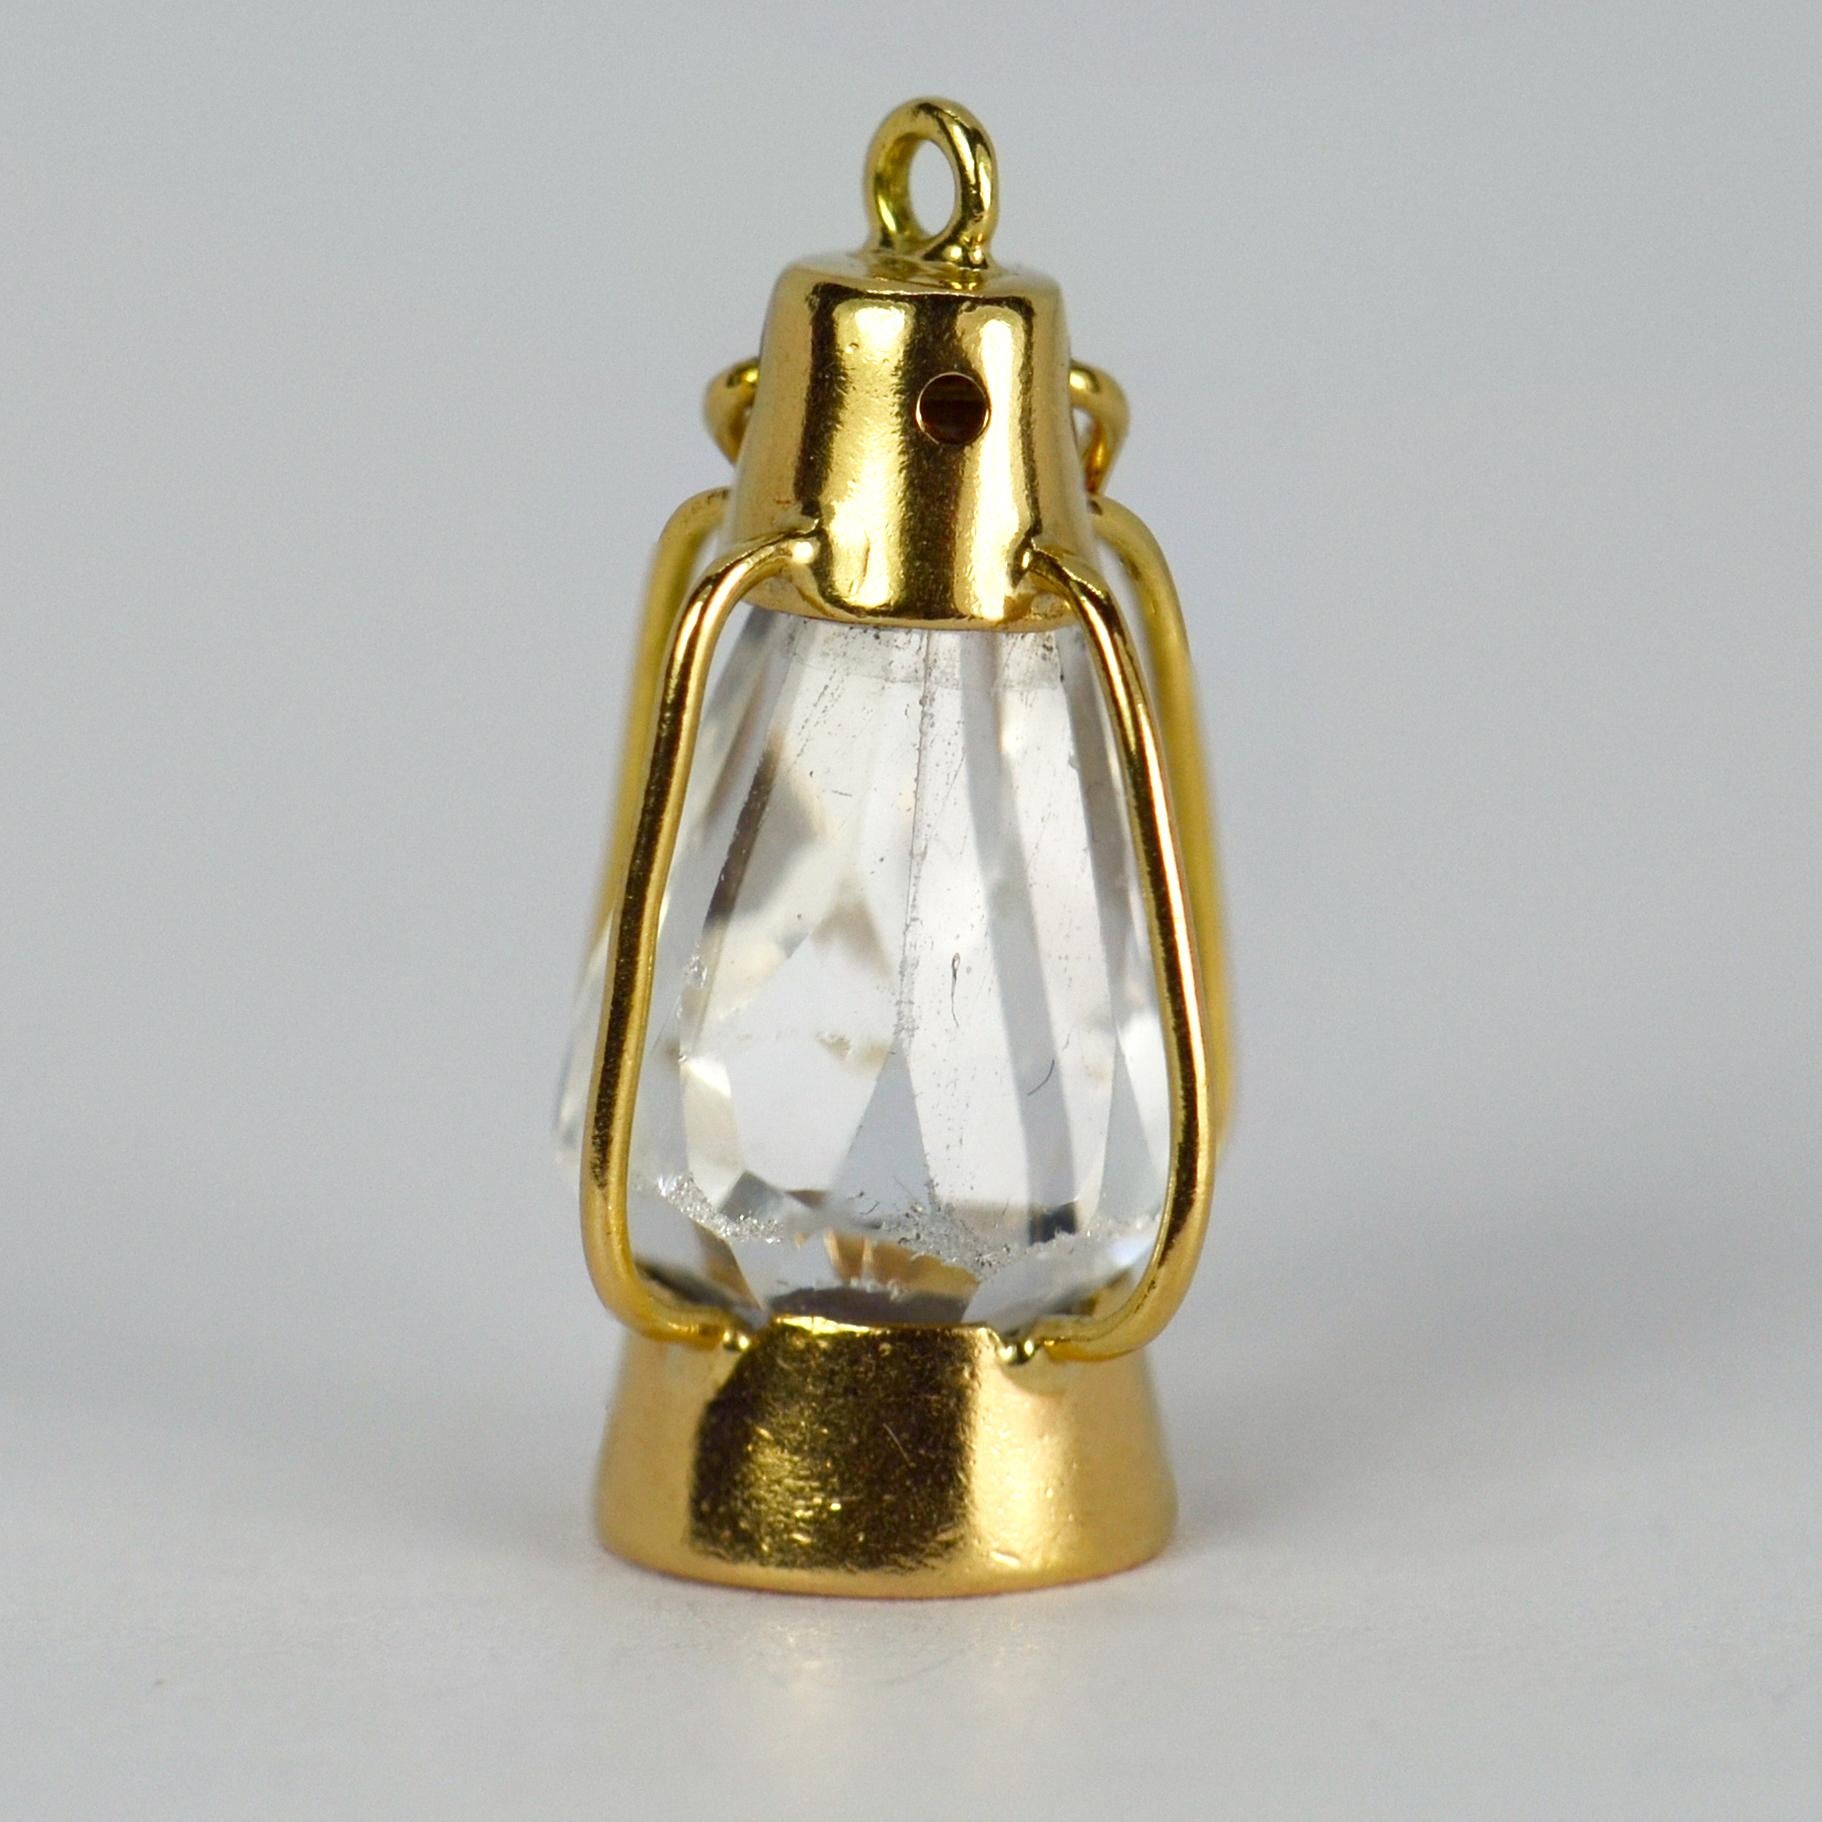 An 18 karat (18K) yellow gold charm pendant designed as a storm lantern with colourless paste glass. Unmarked but tested for 18 karat gold. 

Dimensions: 2.2 x 1.1 x 0.9 cm
Weight: 1.91 grams
